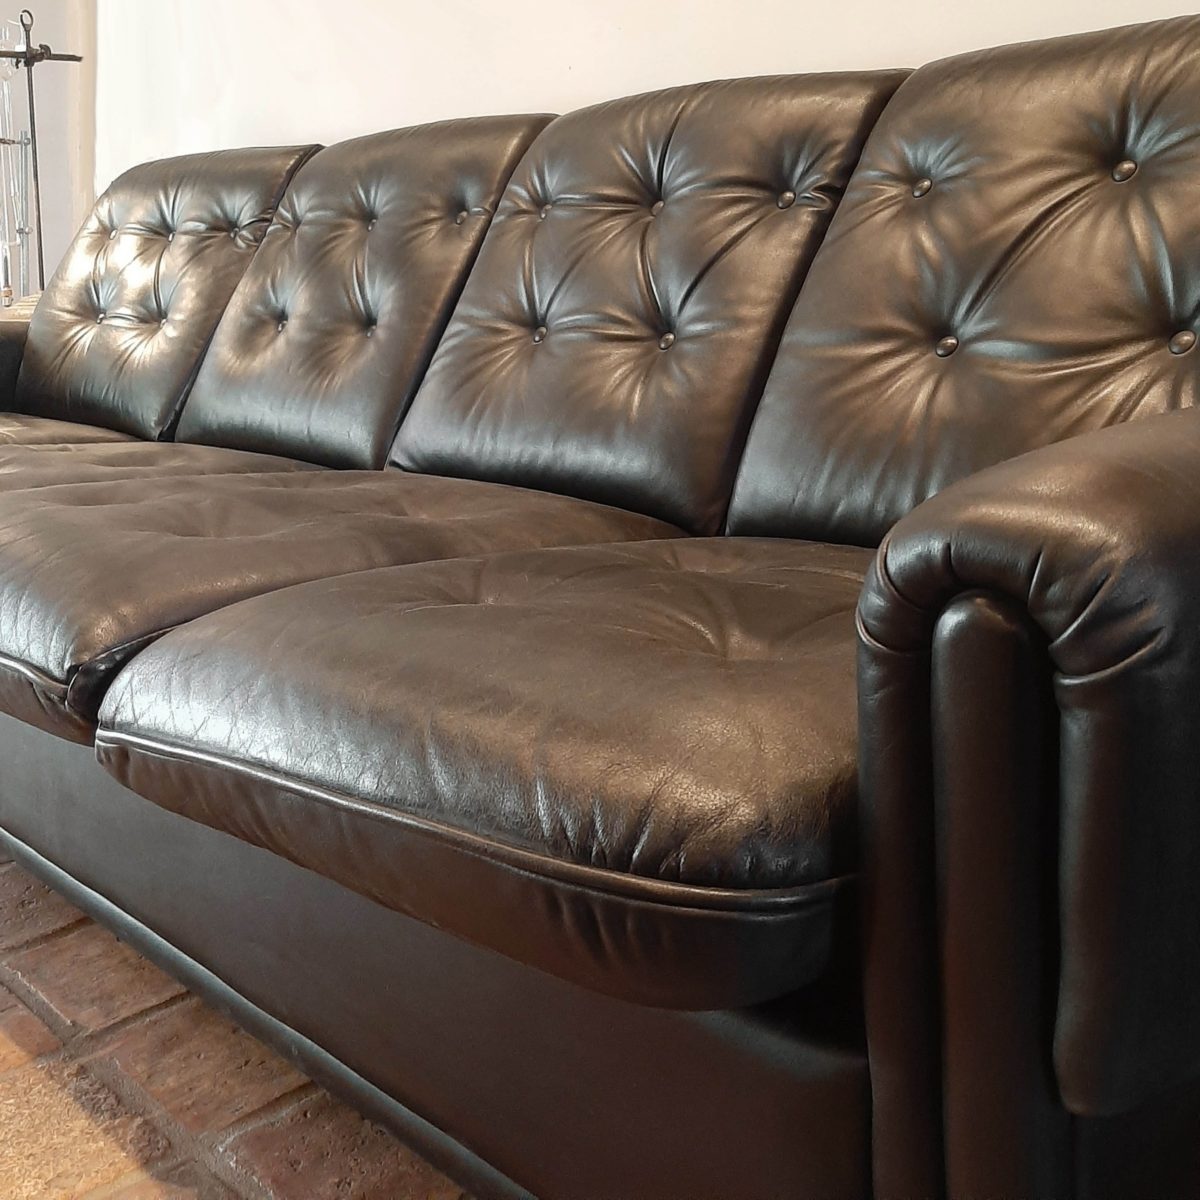 Vintage fourseater sofa made of black leather Piet Jonker